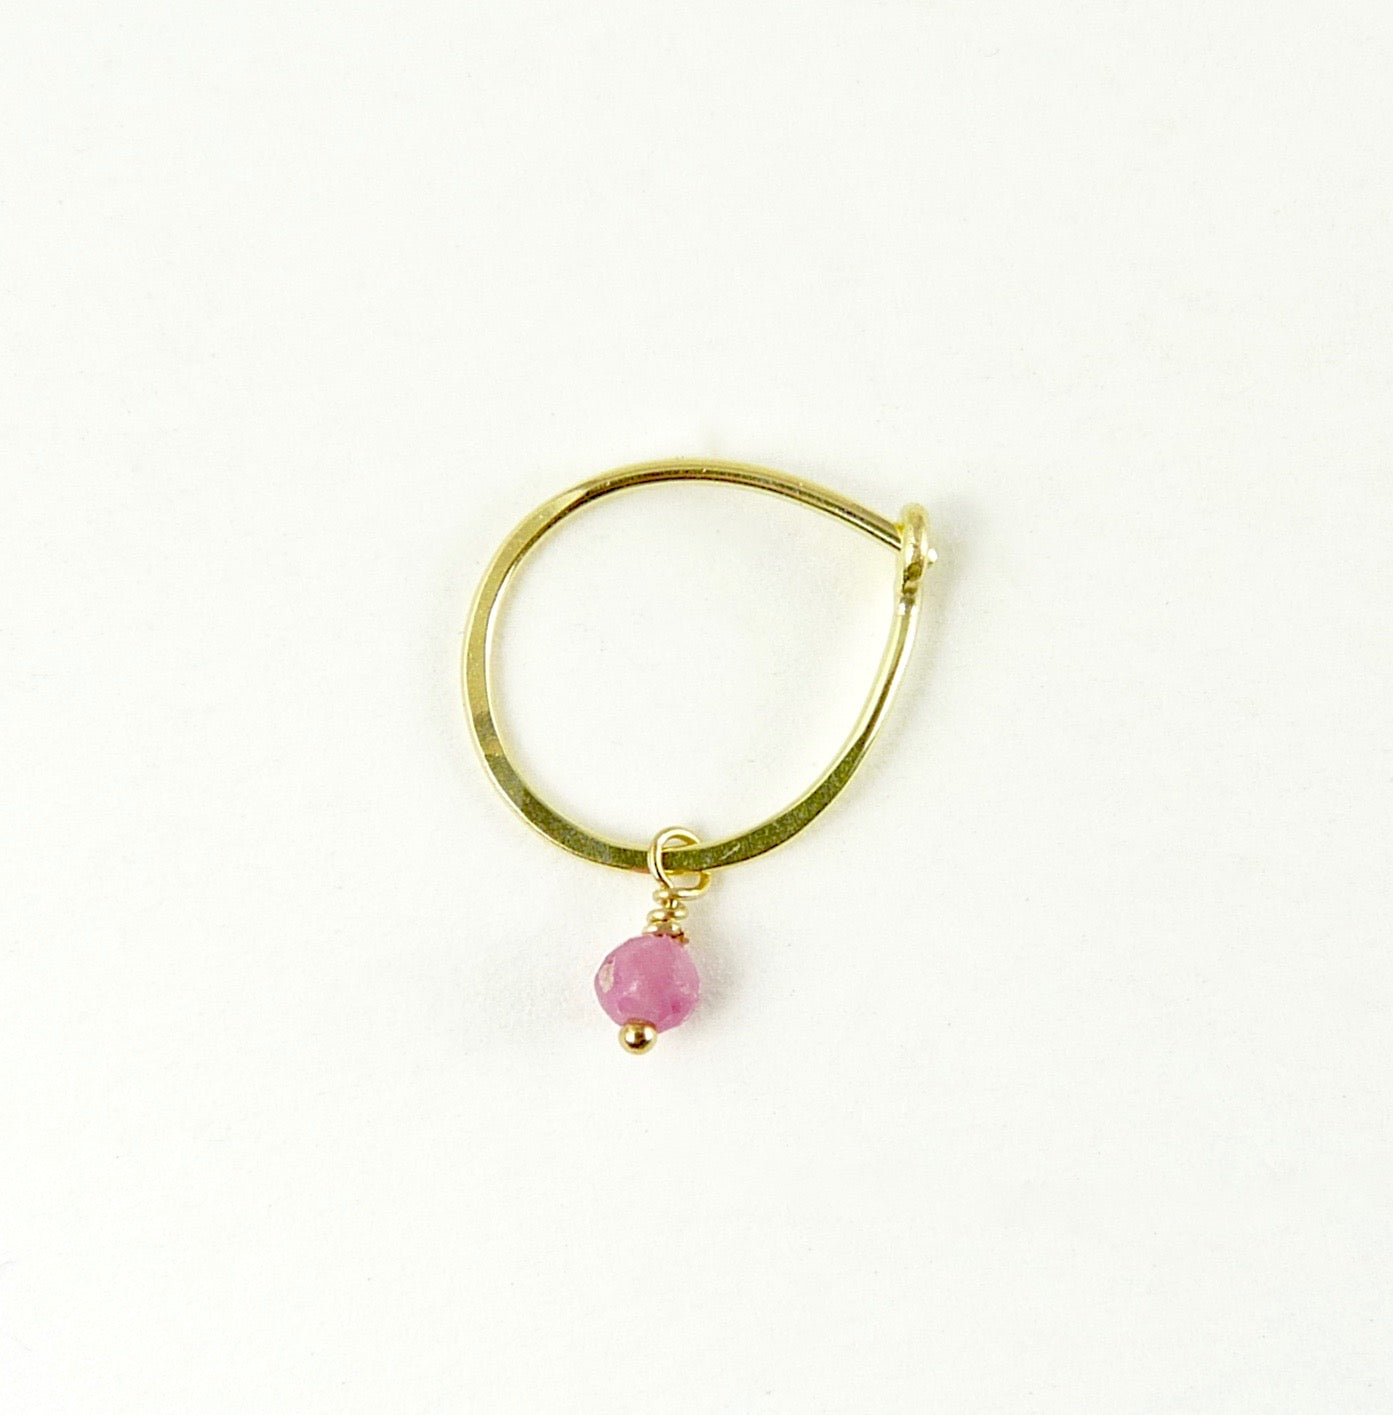 18ct Gold hoop earring with small gemstone bead